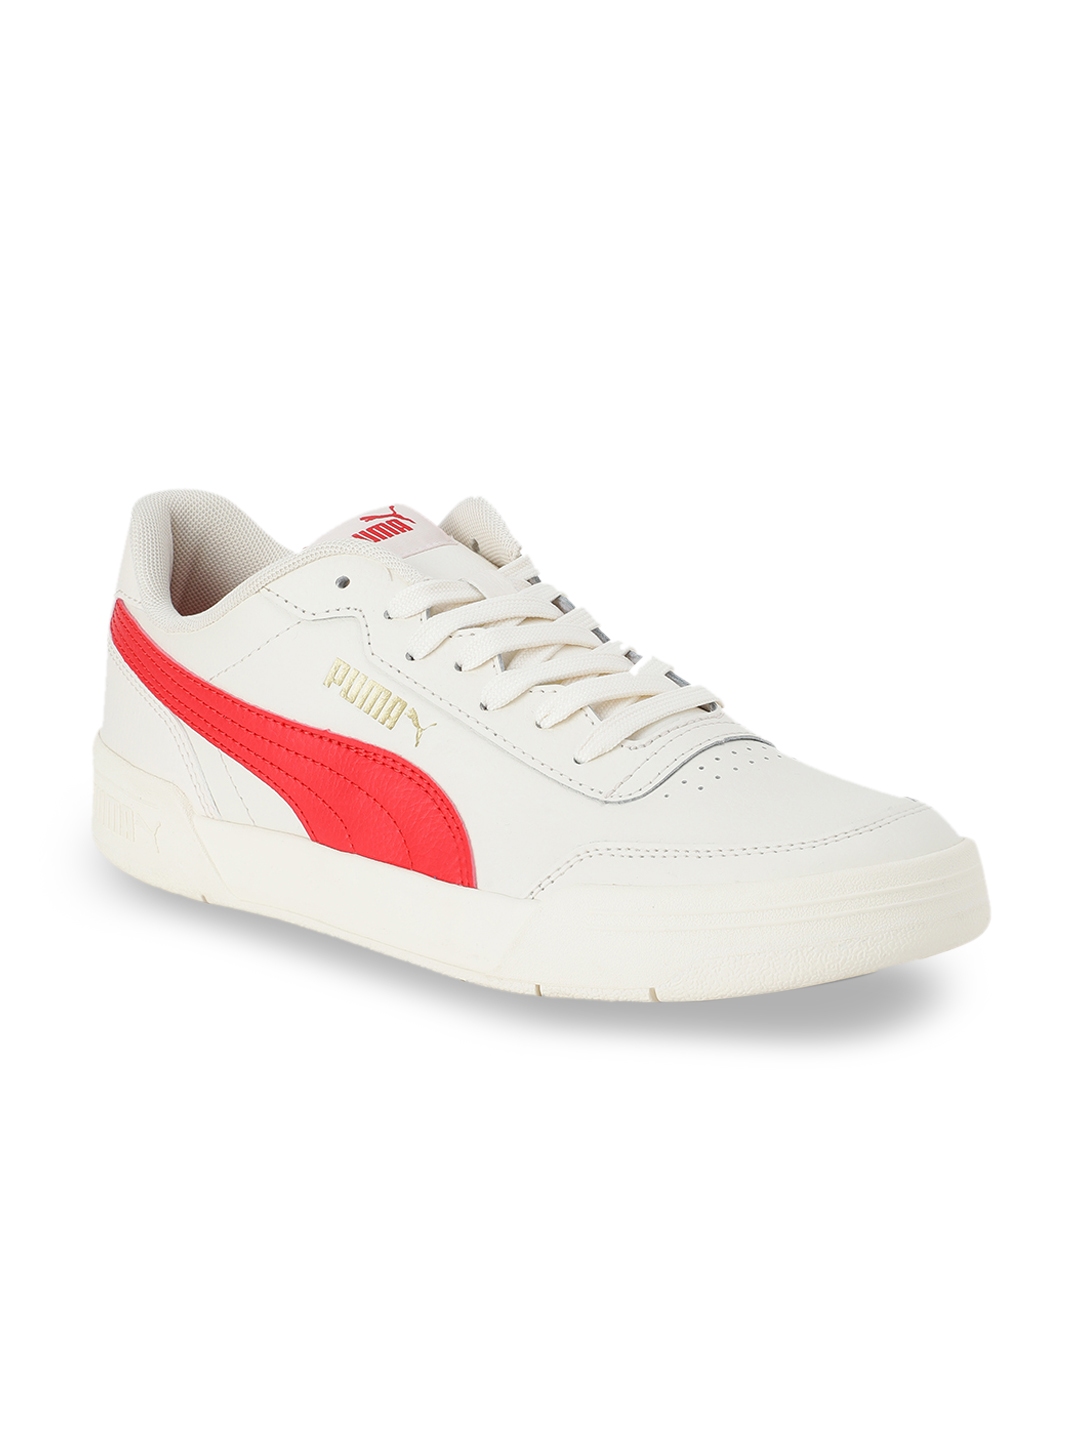 Buy Puma Unisex White & Red Caracal Sneakers - Casual Shoes for Unisex ...